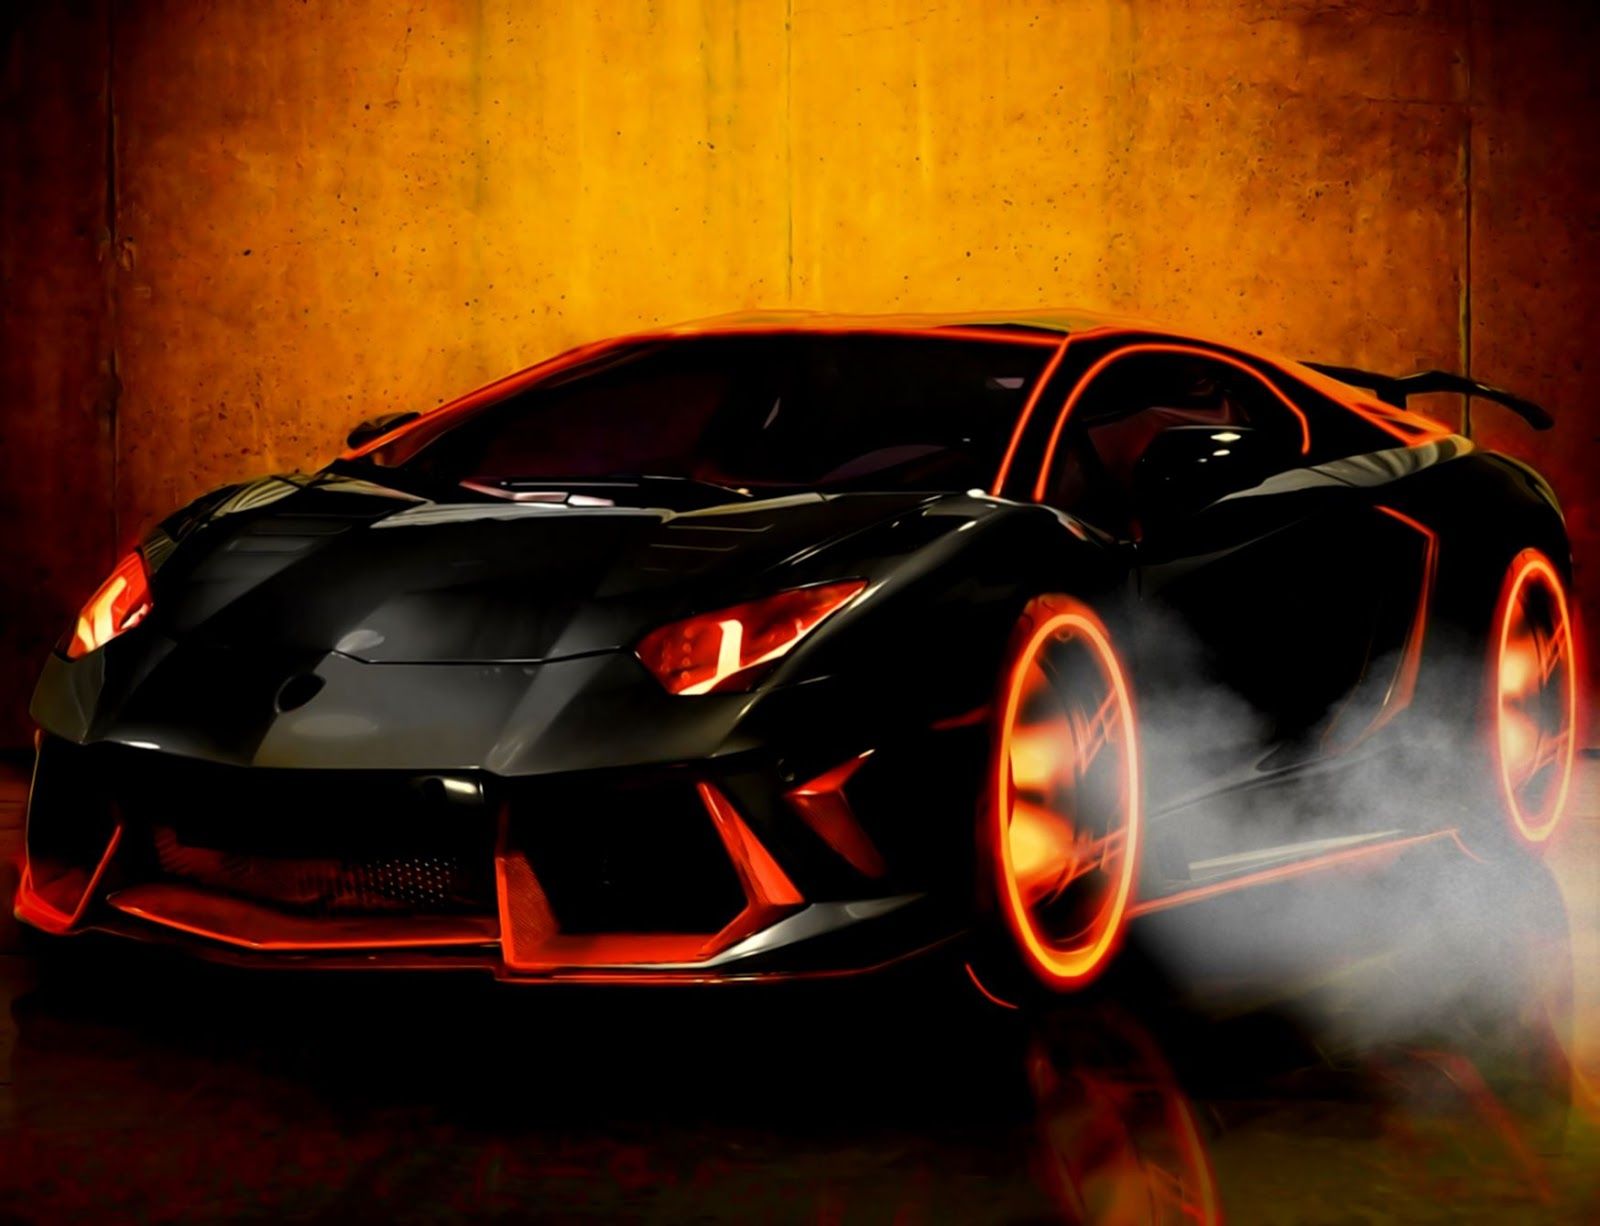 Cool Neon Cars Wallpapers - Wallpaper Cave